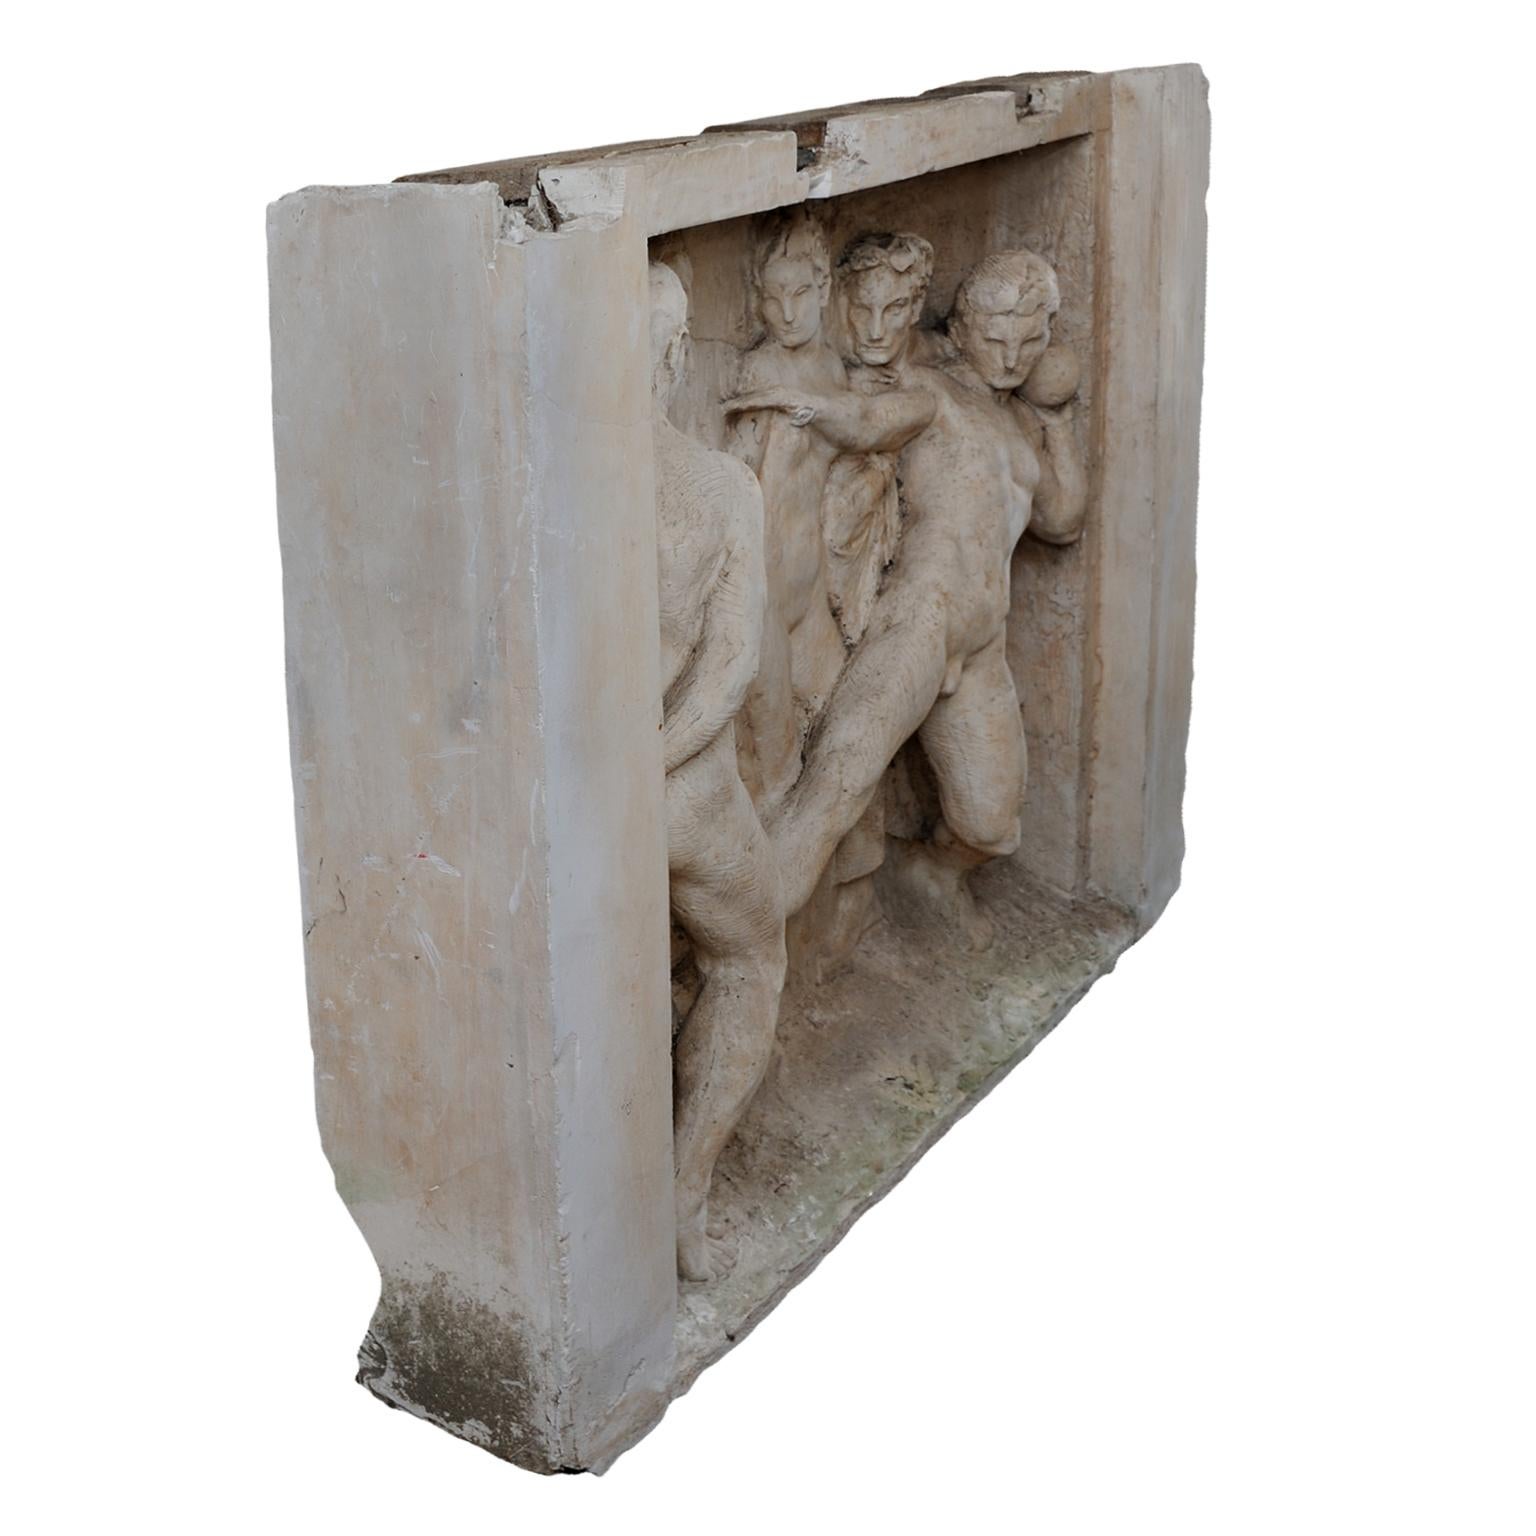 This is a superb and massive French neoclassical style plaster cast Frieze of the pre-fascist period, in totally original condition depicting a group of athletes, presided over by the Goddess Victory, circa 1920.
Would look wonderful in a heavy